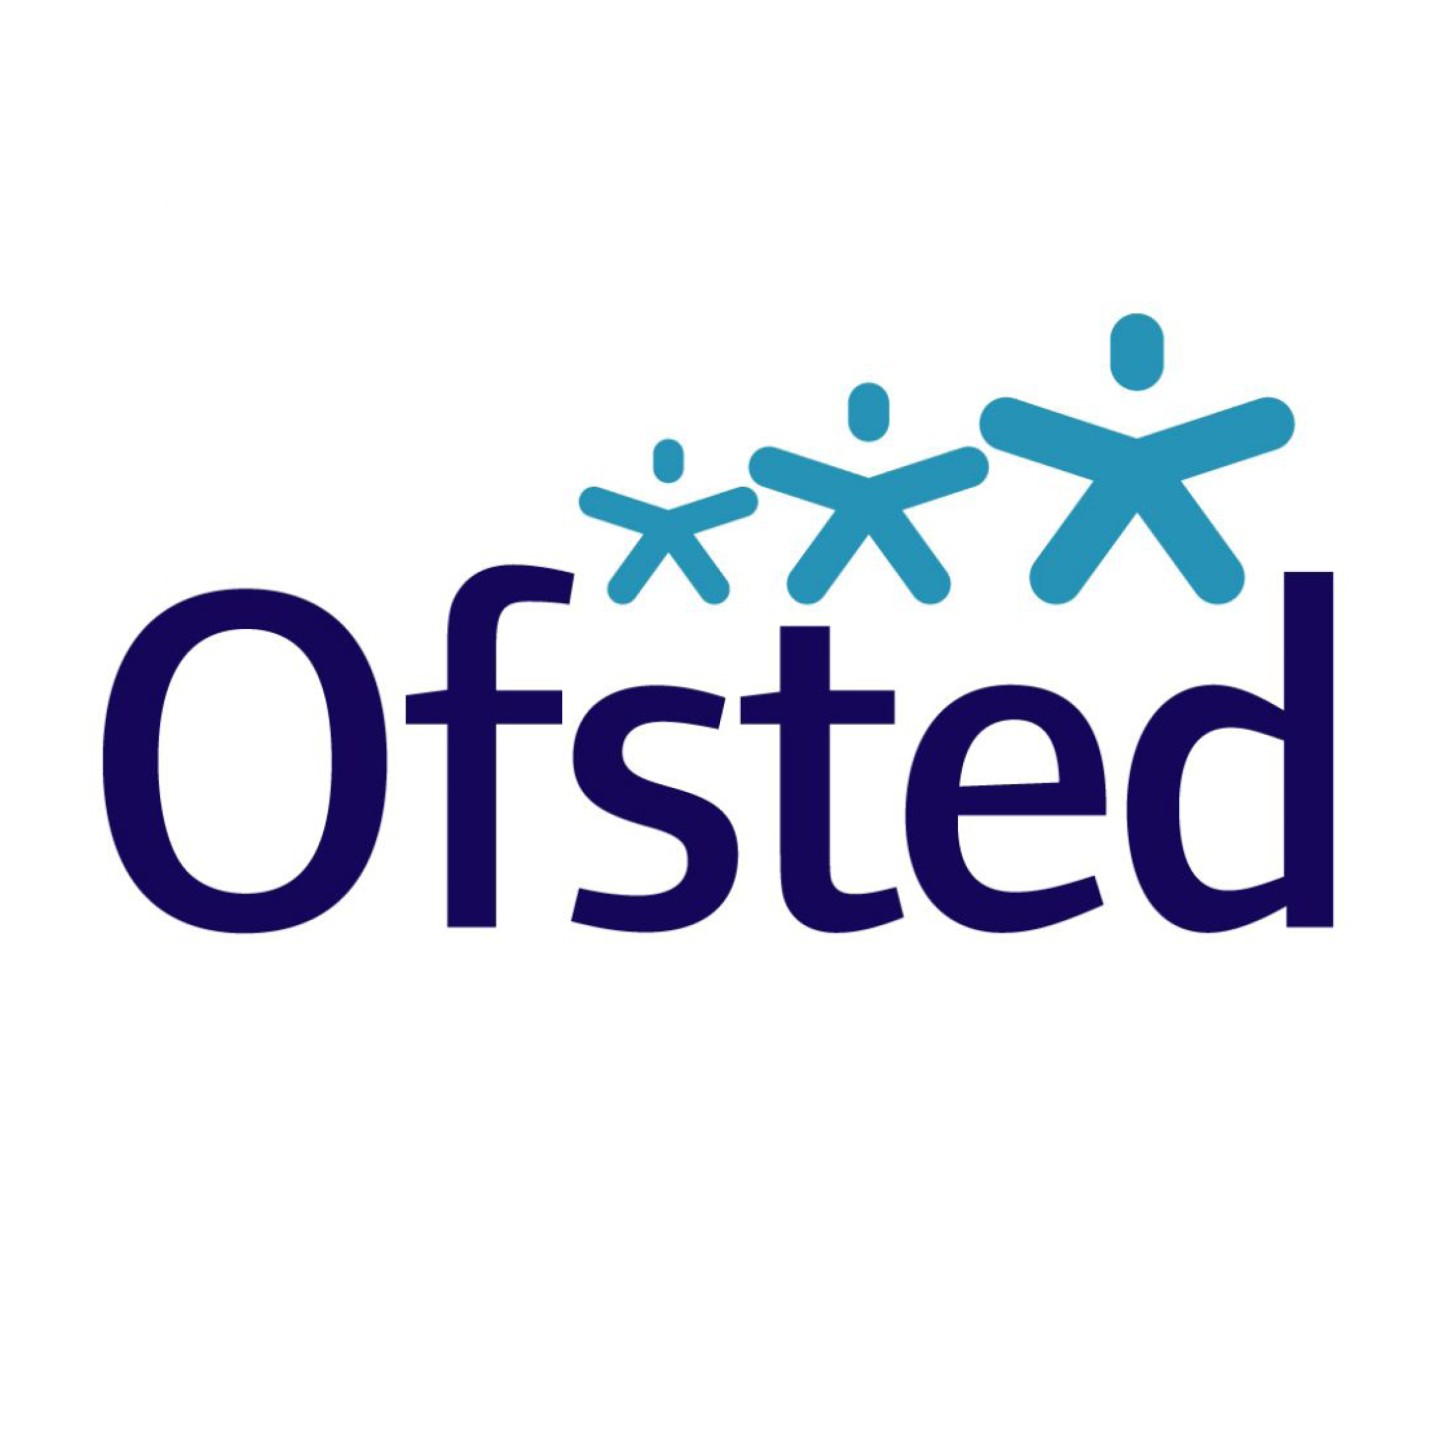 Ofsted-logo